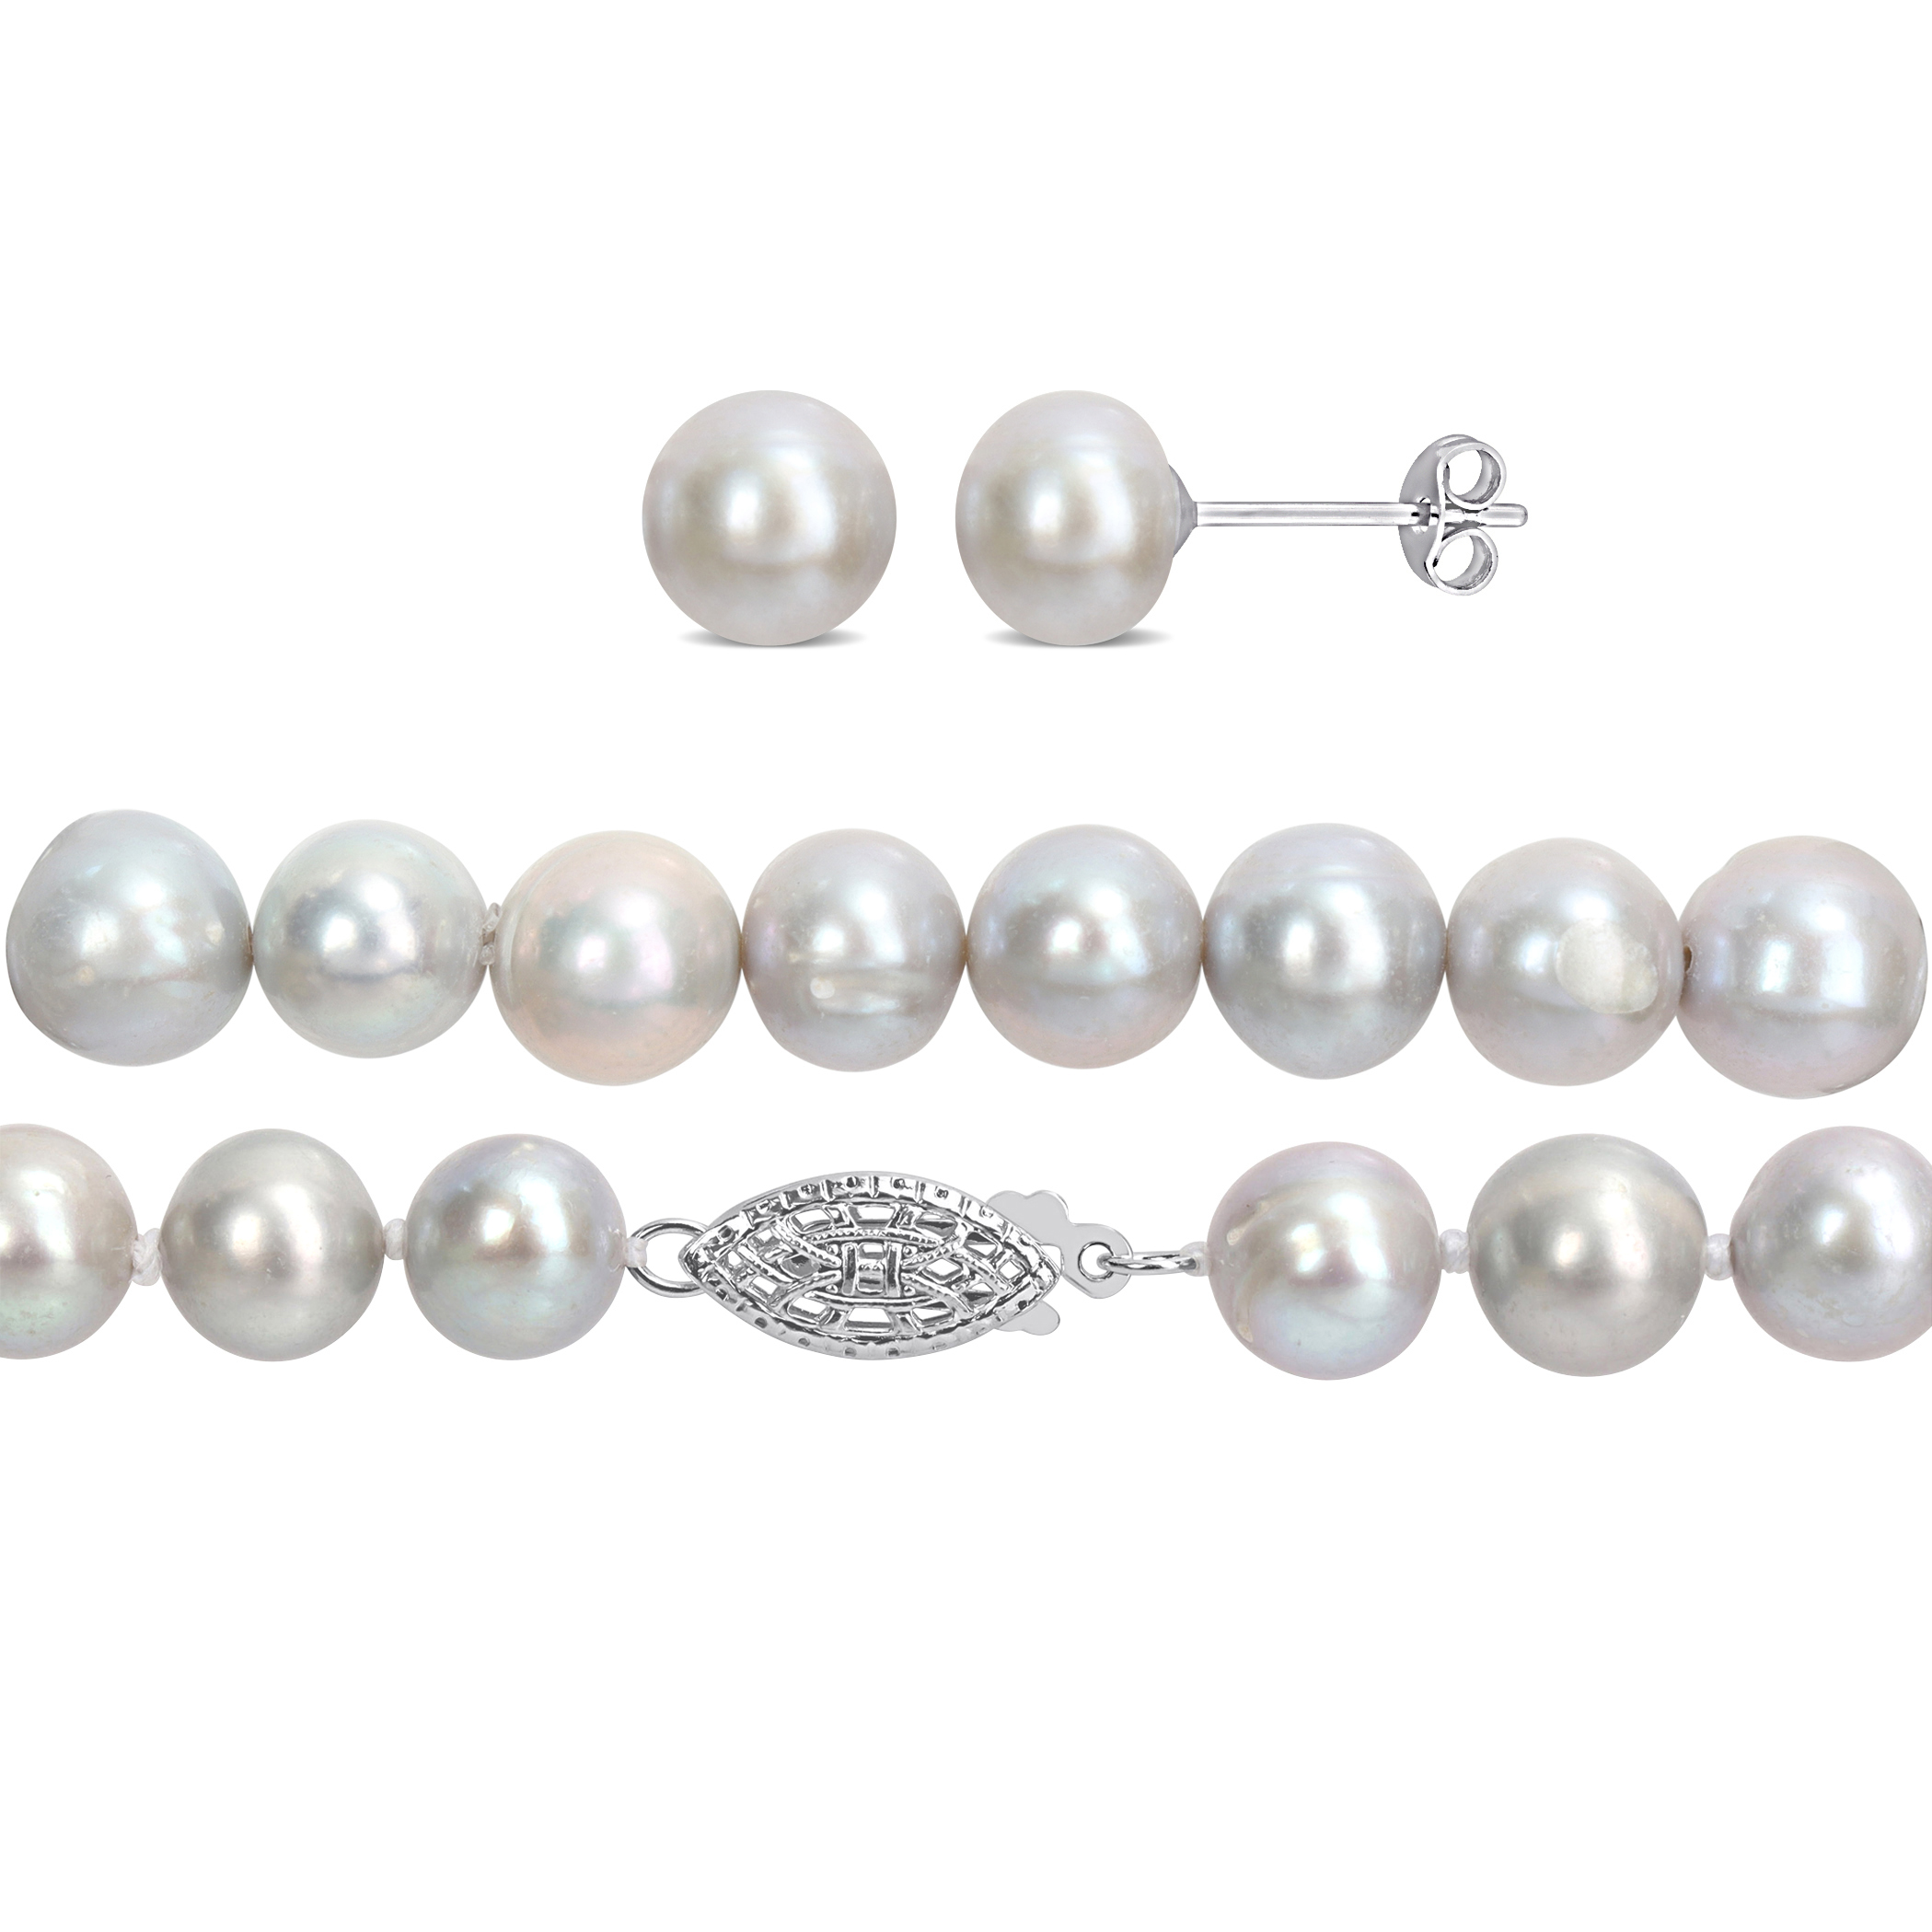 7.5-8 MM Grey Freshwater Cultured Pearl 3-Piece Set of Necklace Earrings and Bracelet in Sterling Silver